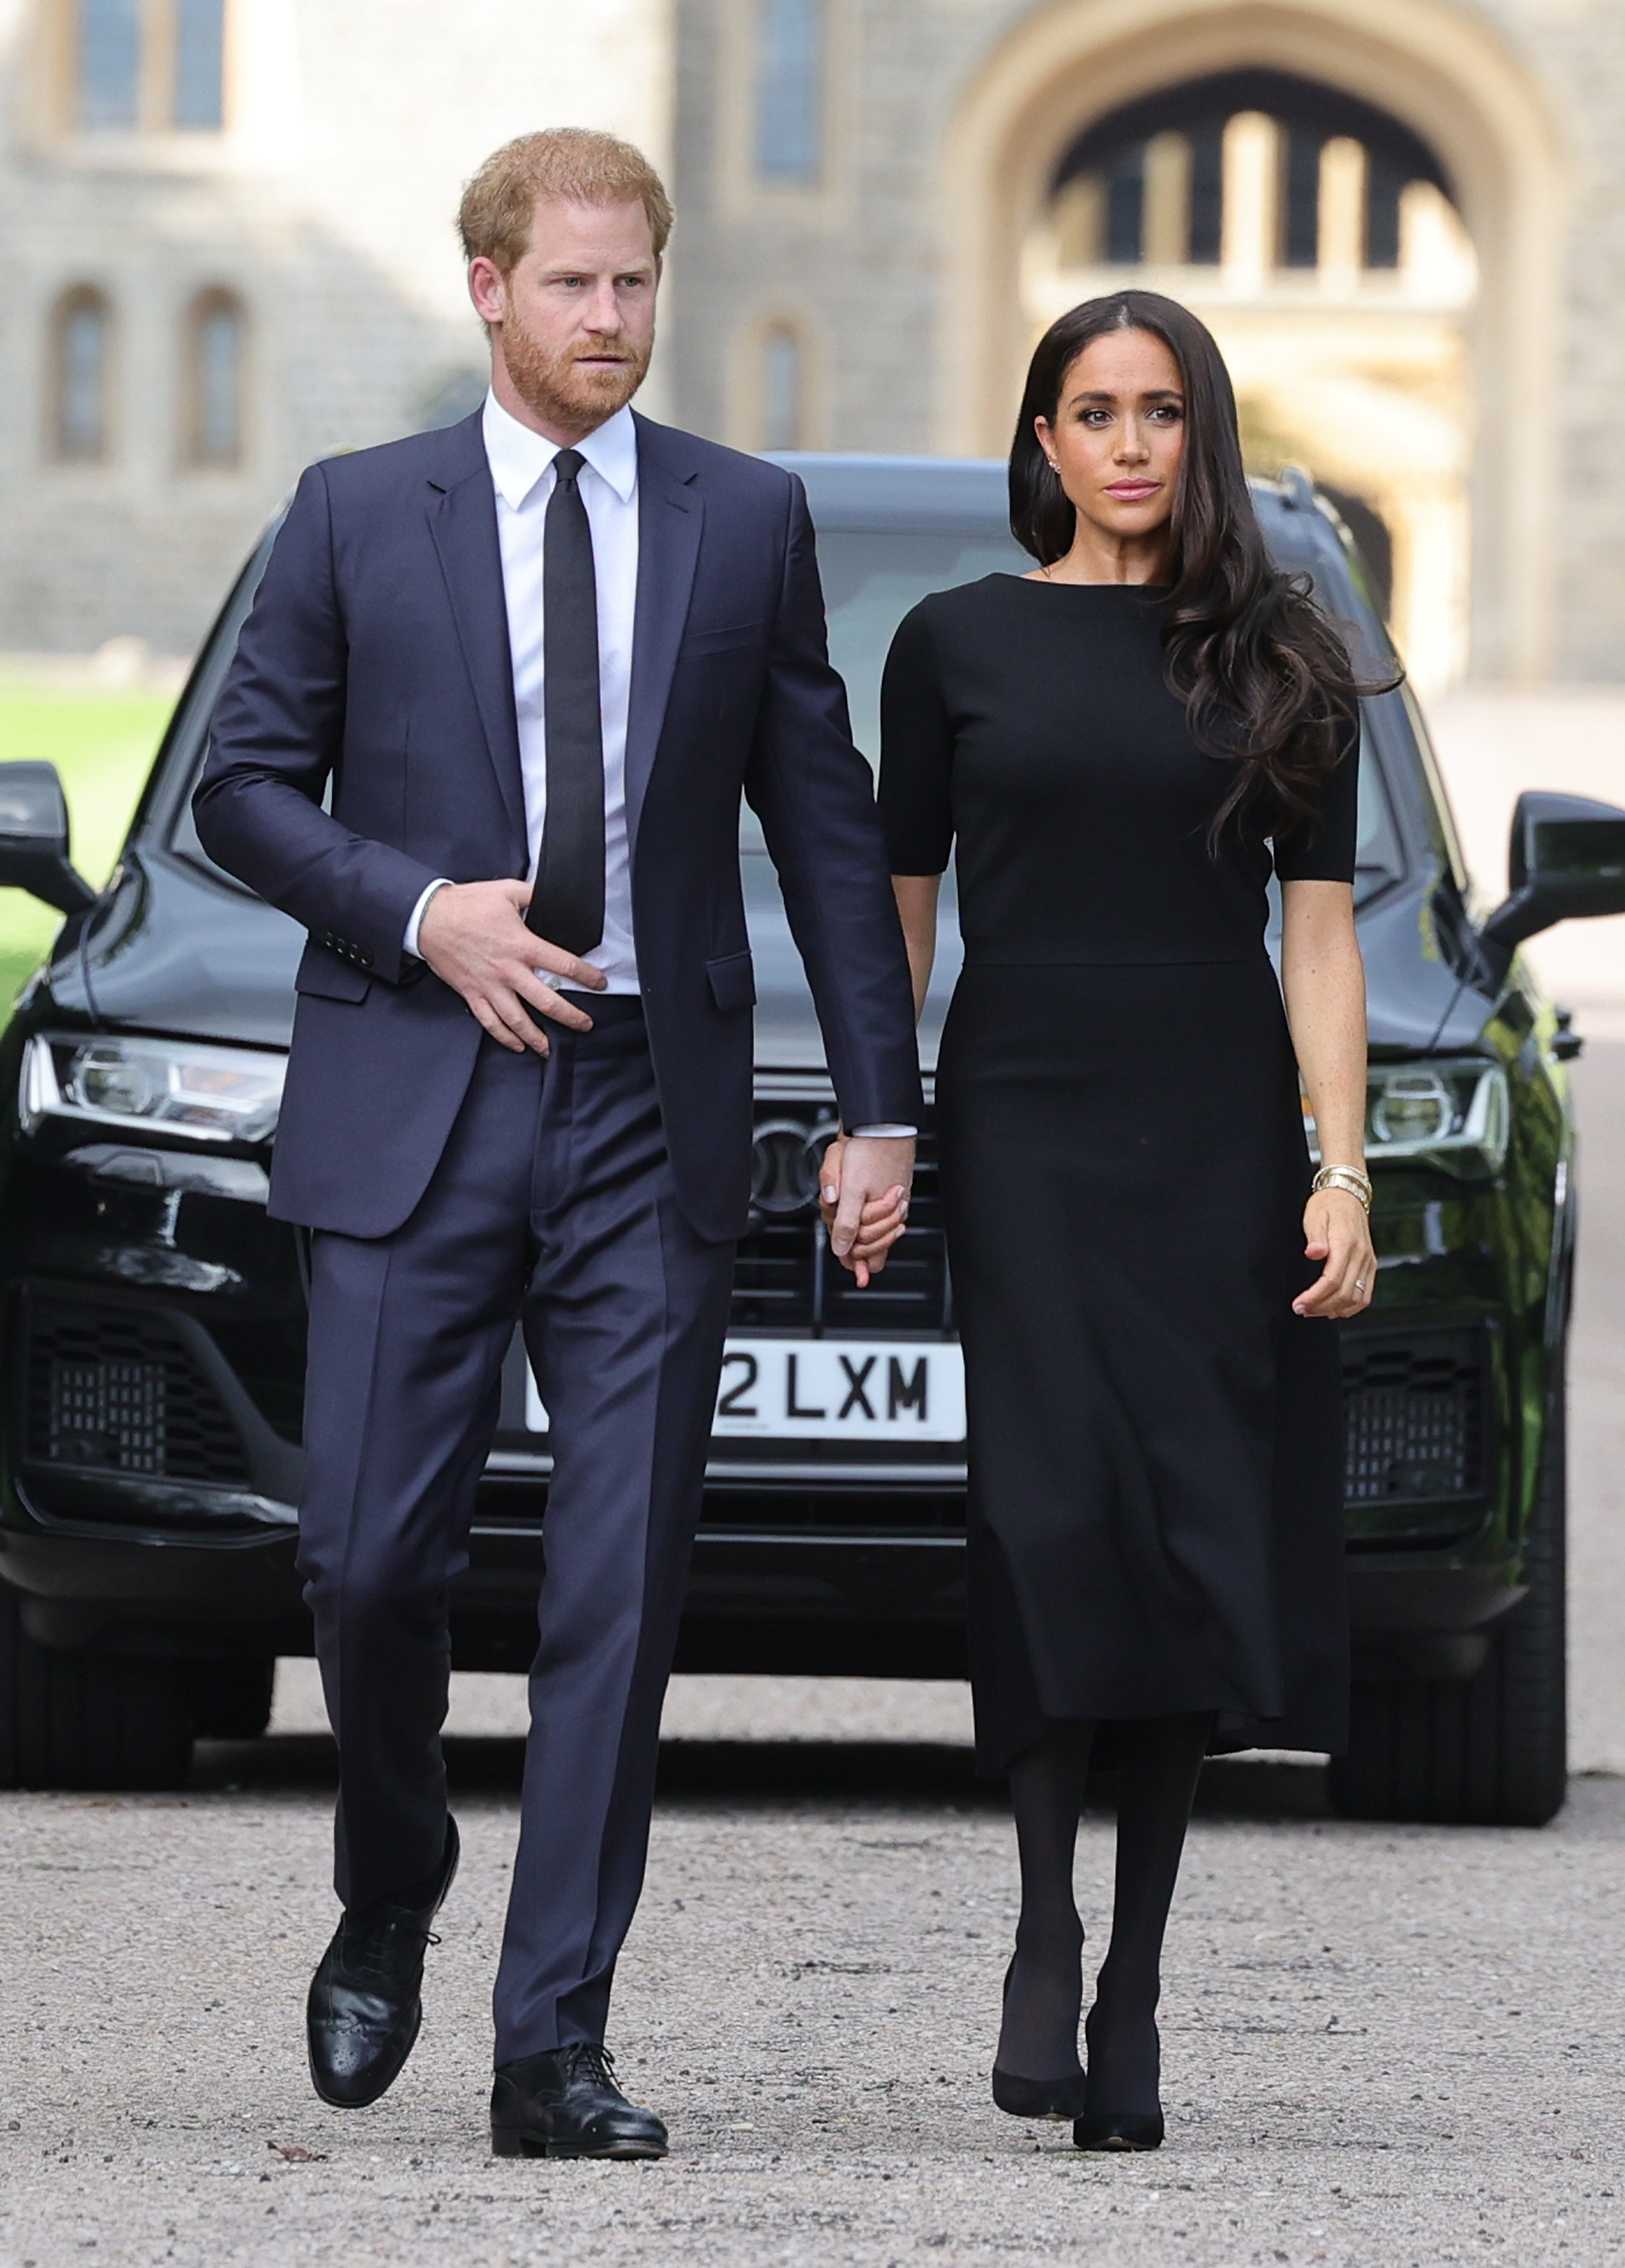 Meghan and Prince Harry holding hands